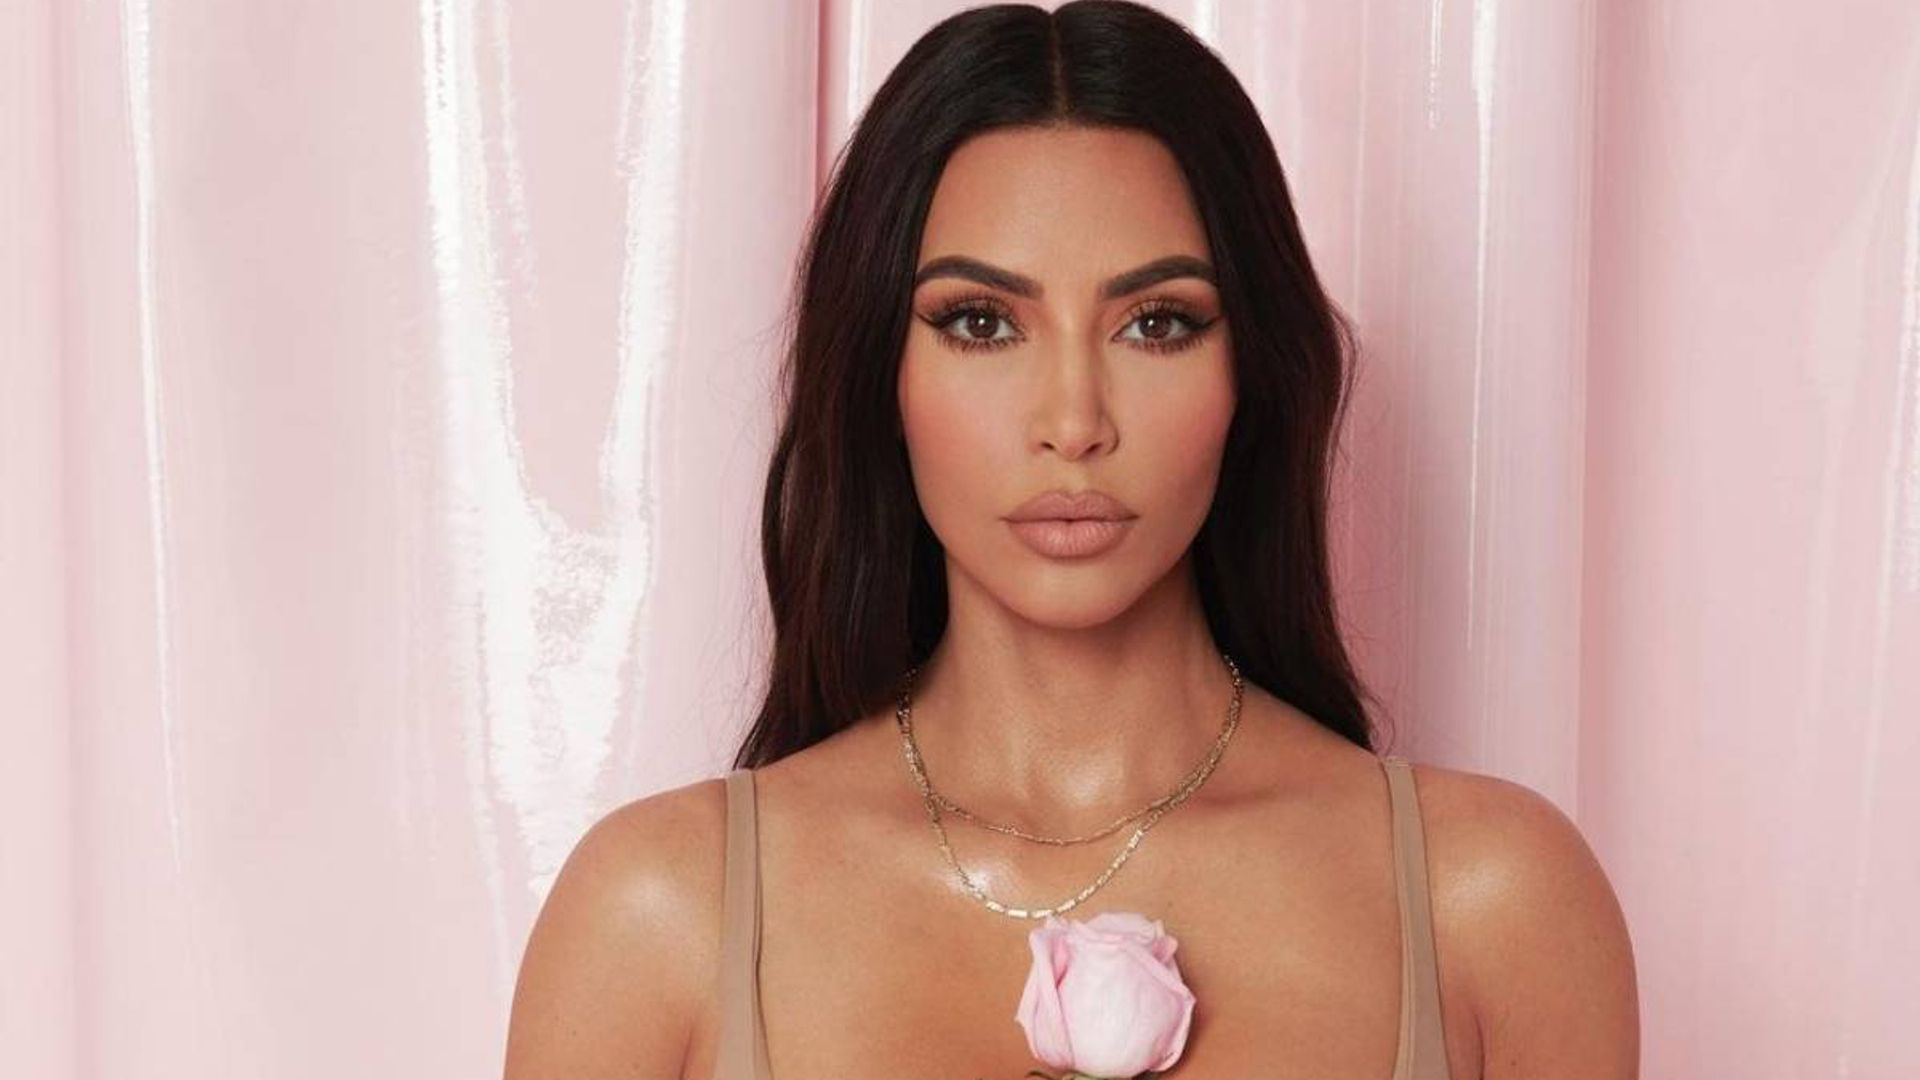 Kim Kardashian restocks SKIMS collection fave with new dreamy spring colors and styles | HELLO!